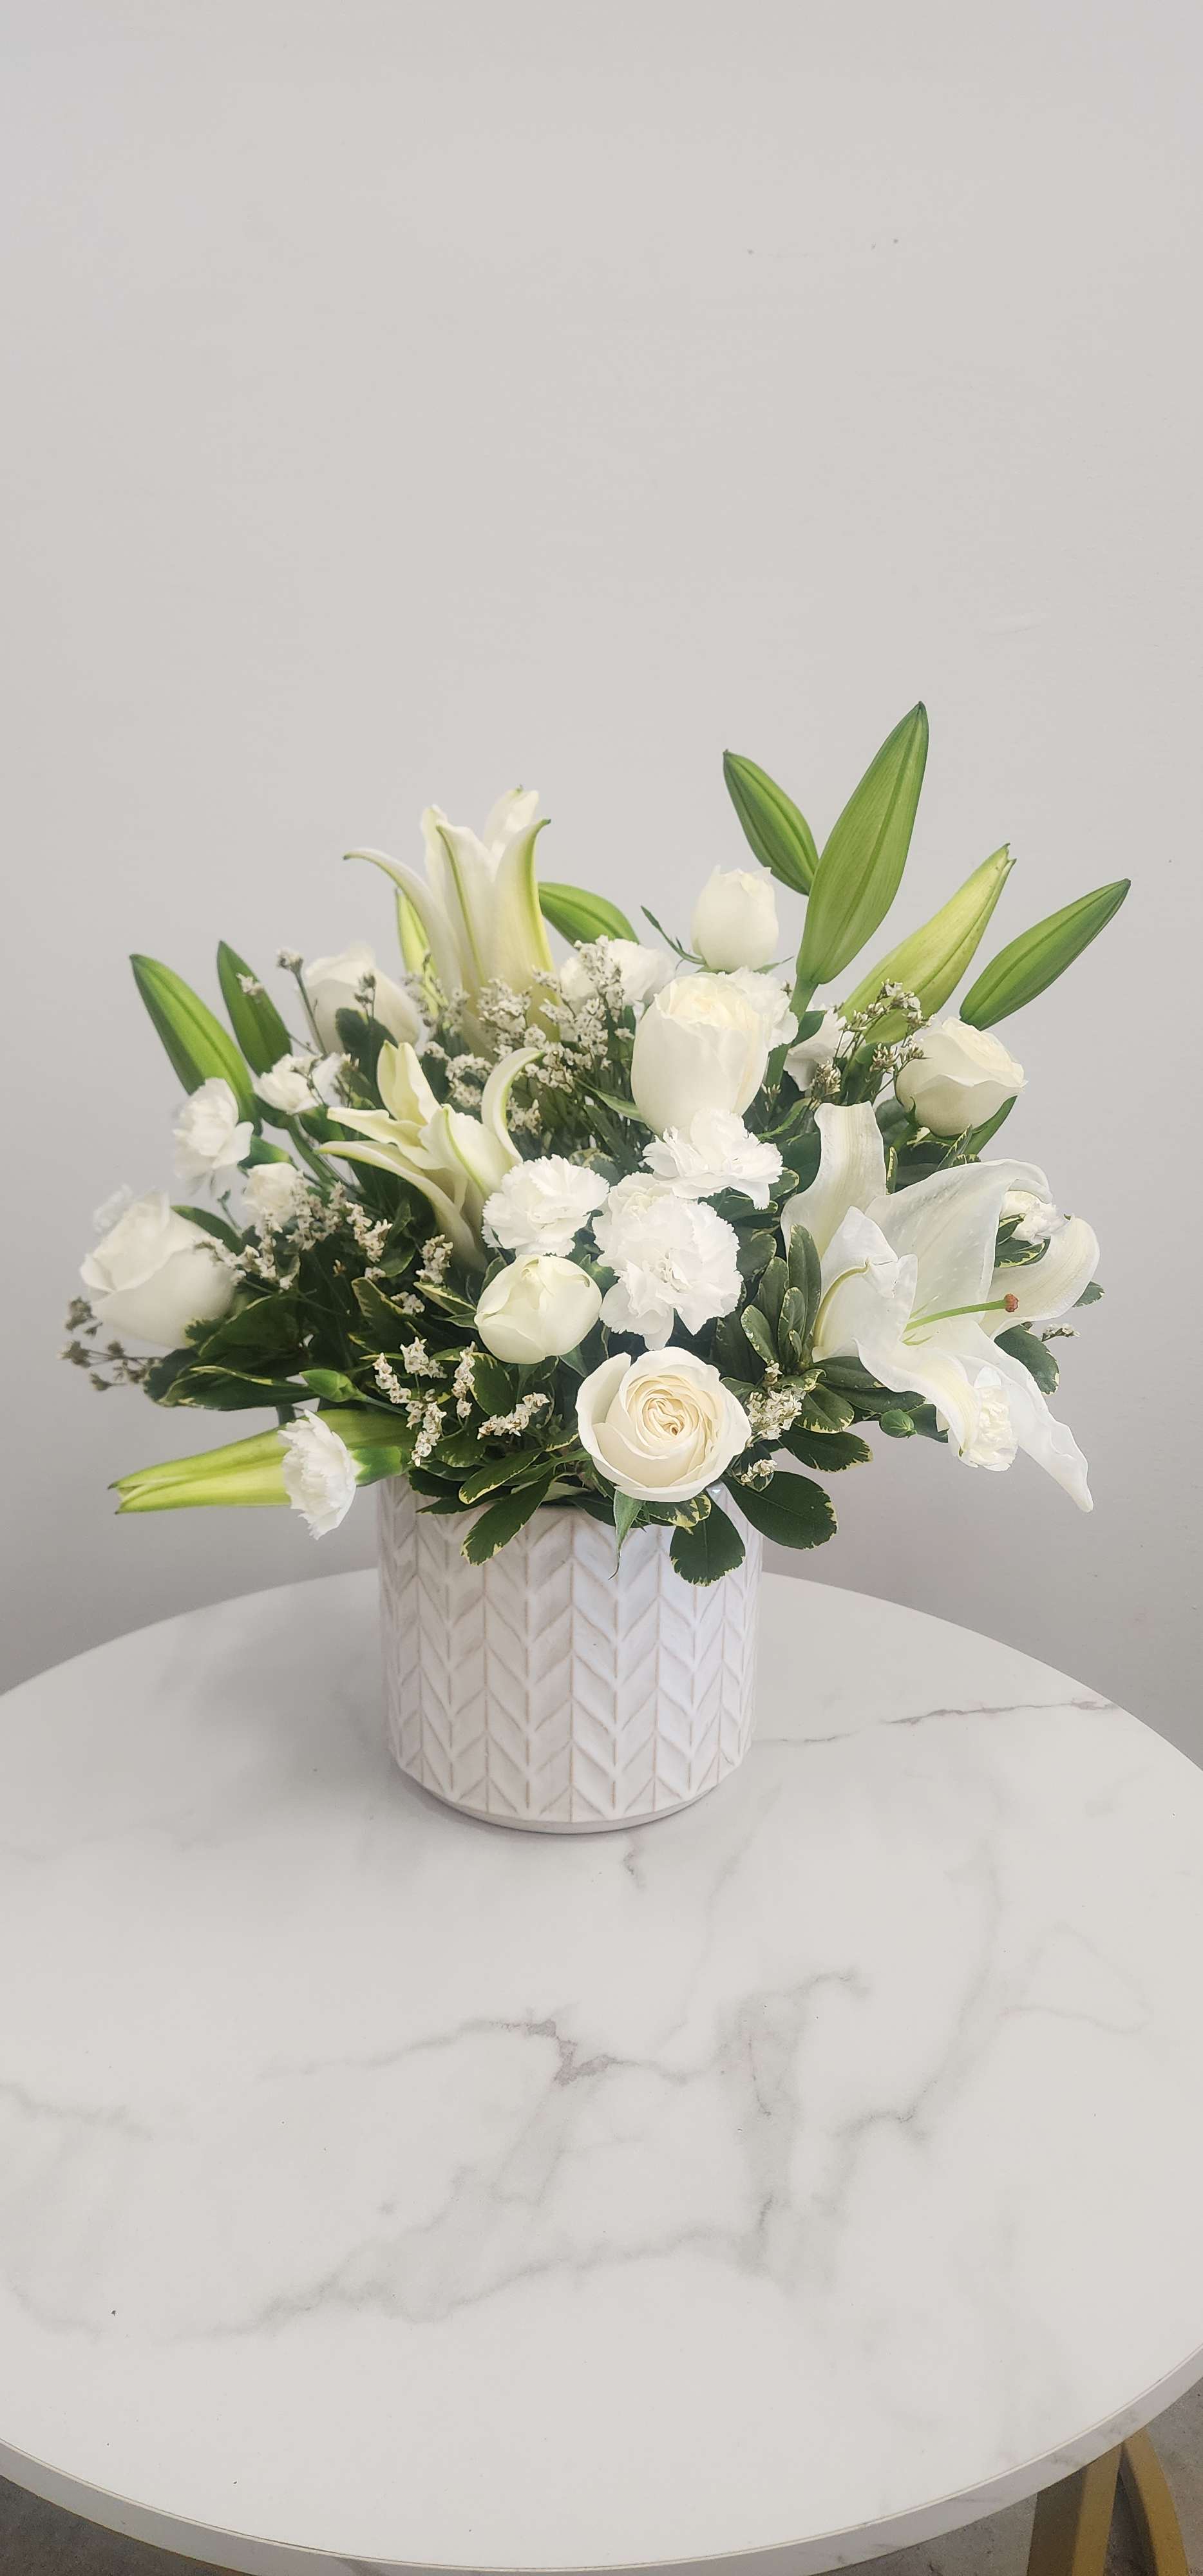  Loving Lilies and Roses Bouquet  - A simply beautiful way to show you care. By sending this elegant arrangement to the home of those in mourning, you are letting them know they are embraced in your thoughts. And in your heart. 